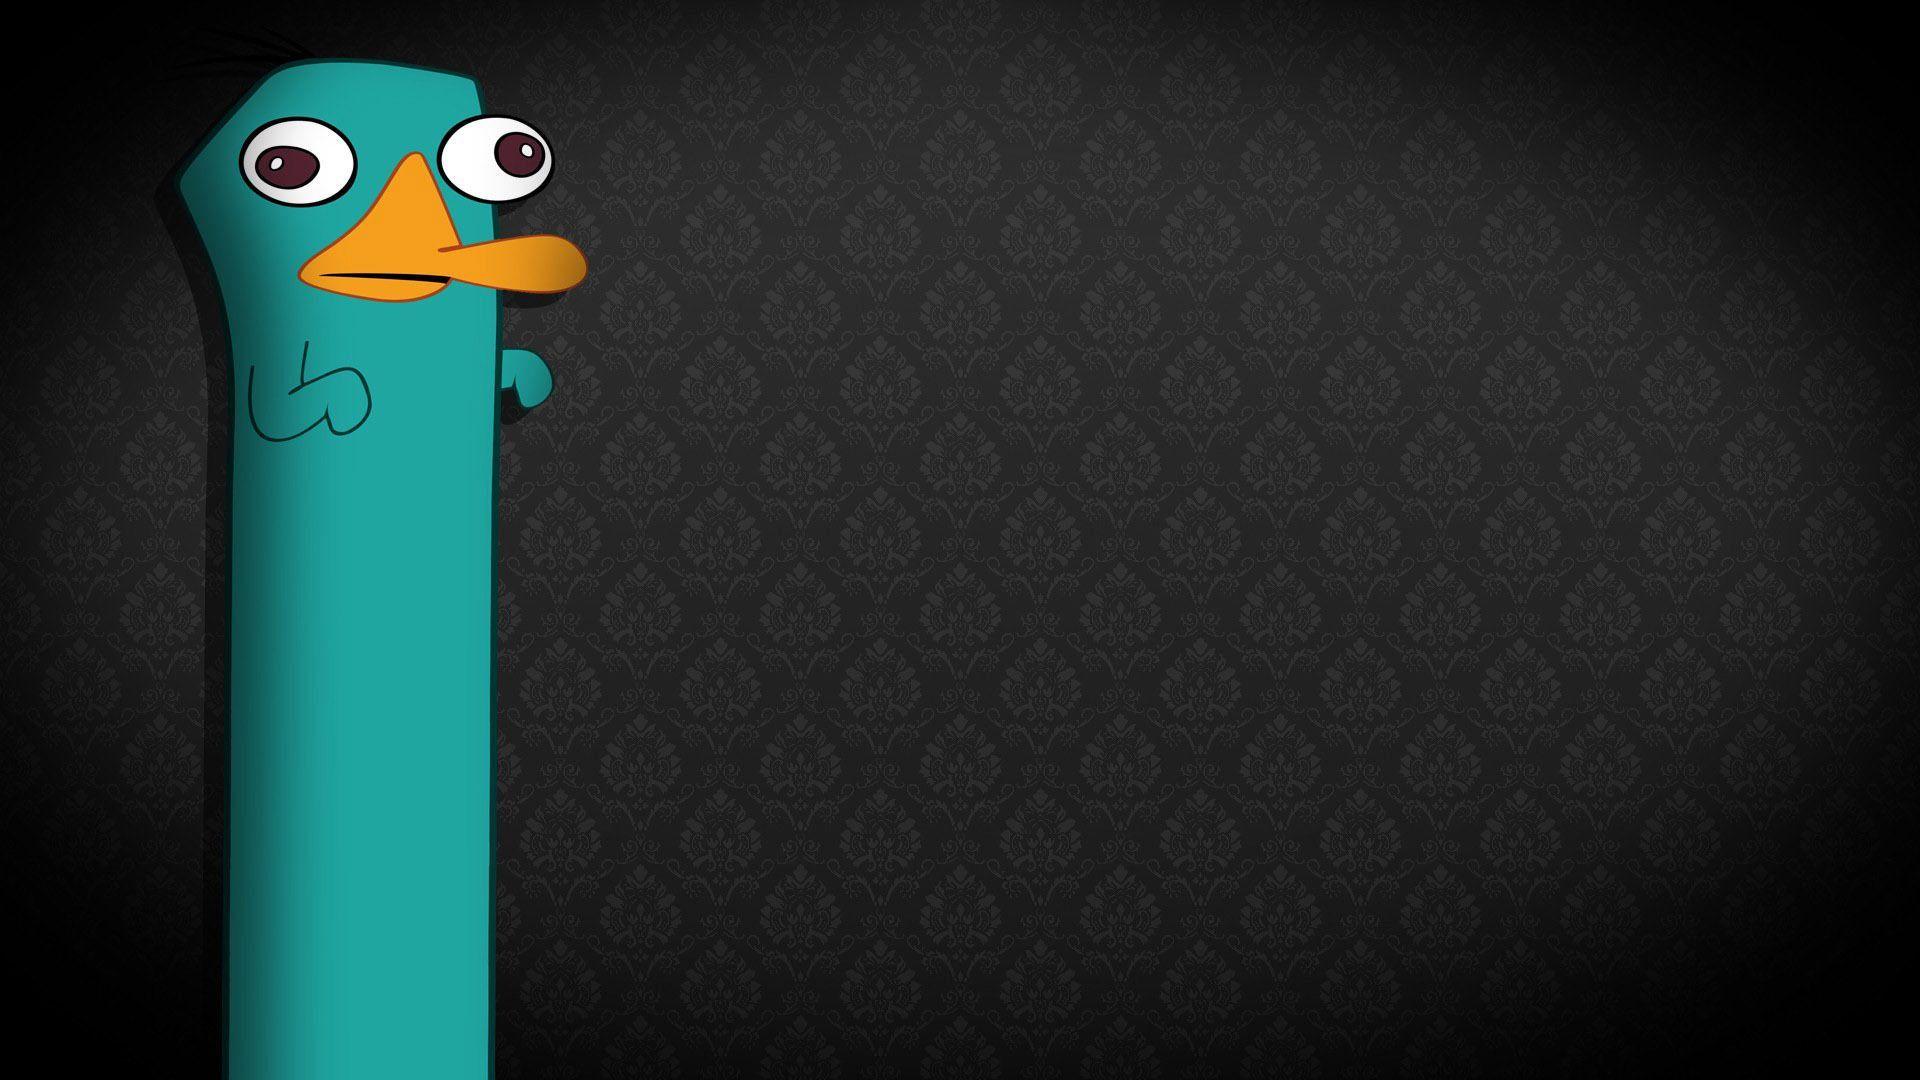 Perry the Platypus 2 HD Image Wallpaper. HD Image Wallpaper